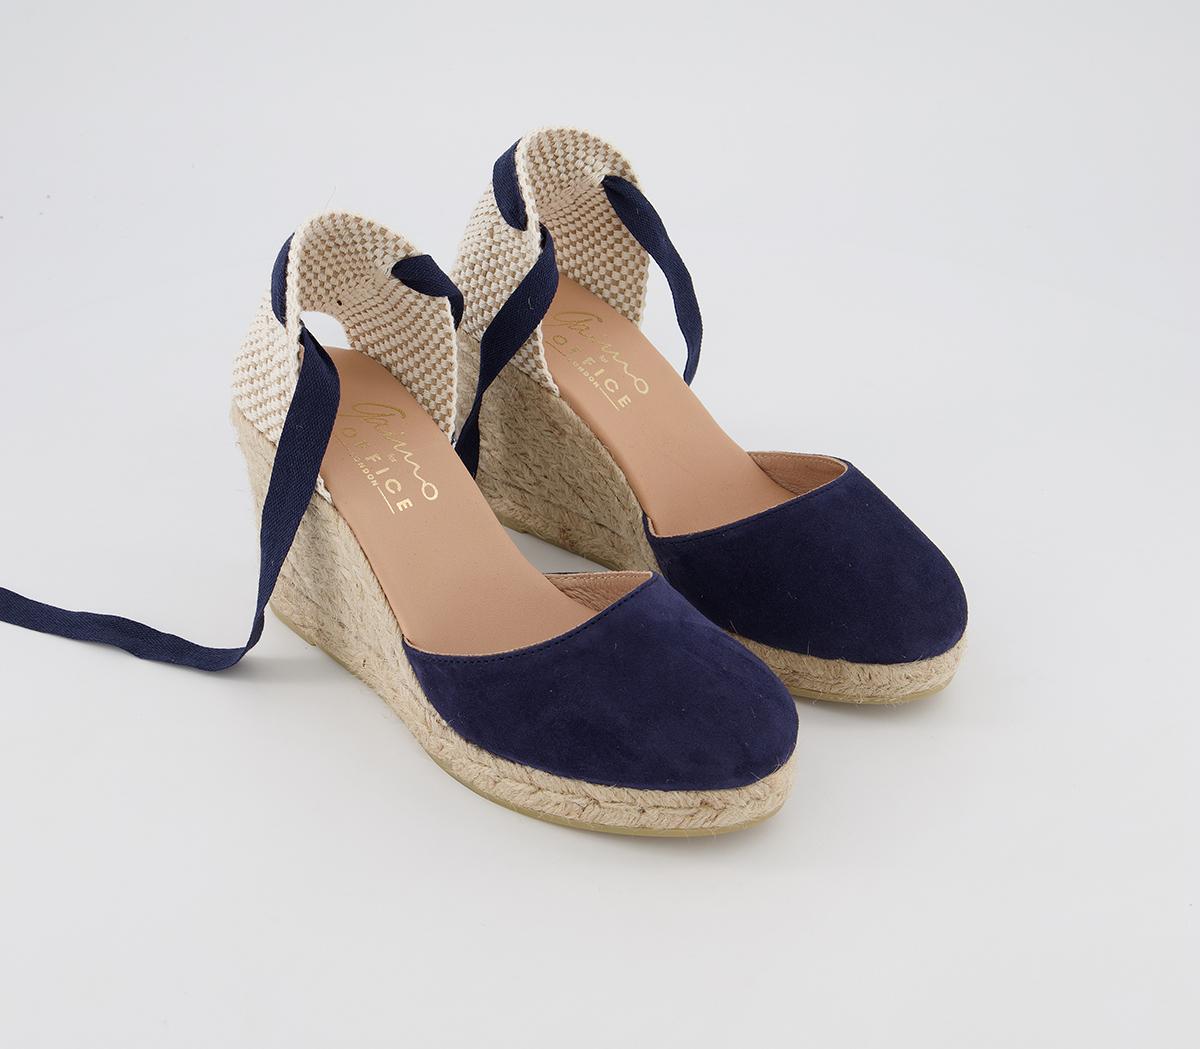 Gaimo for OFFICE Ankle Wrap Heels Navy Suede - High Heels